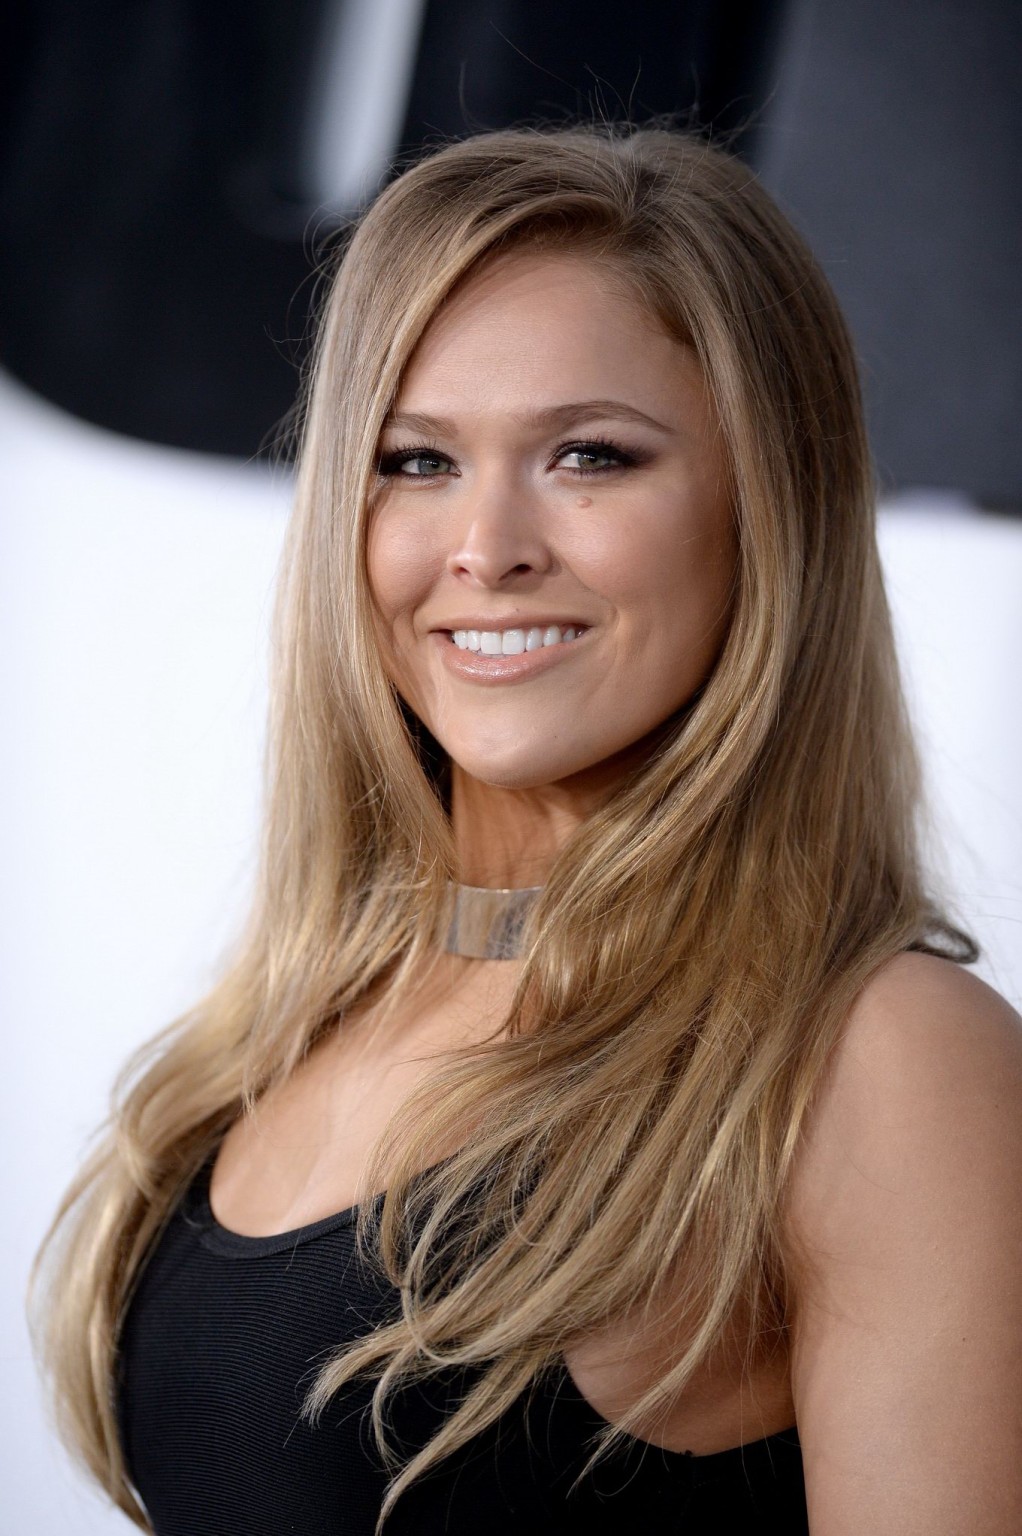 Ronda Rousey busty wearing tight black dress at the Furious 7 premiere in Hollyw #75168336